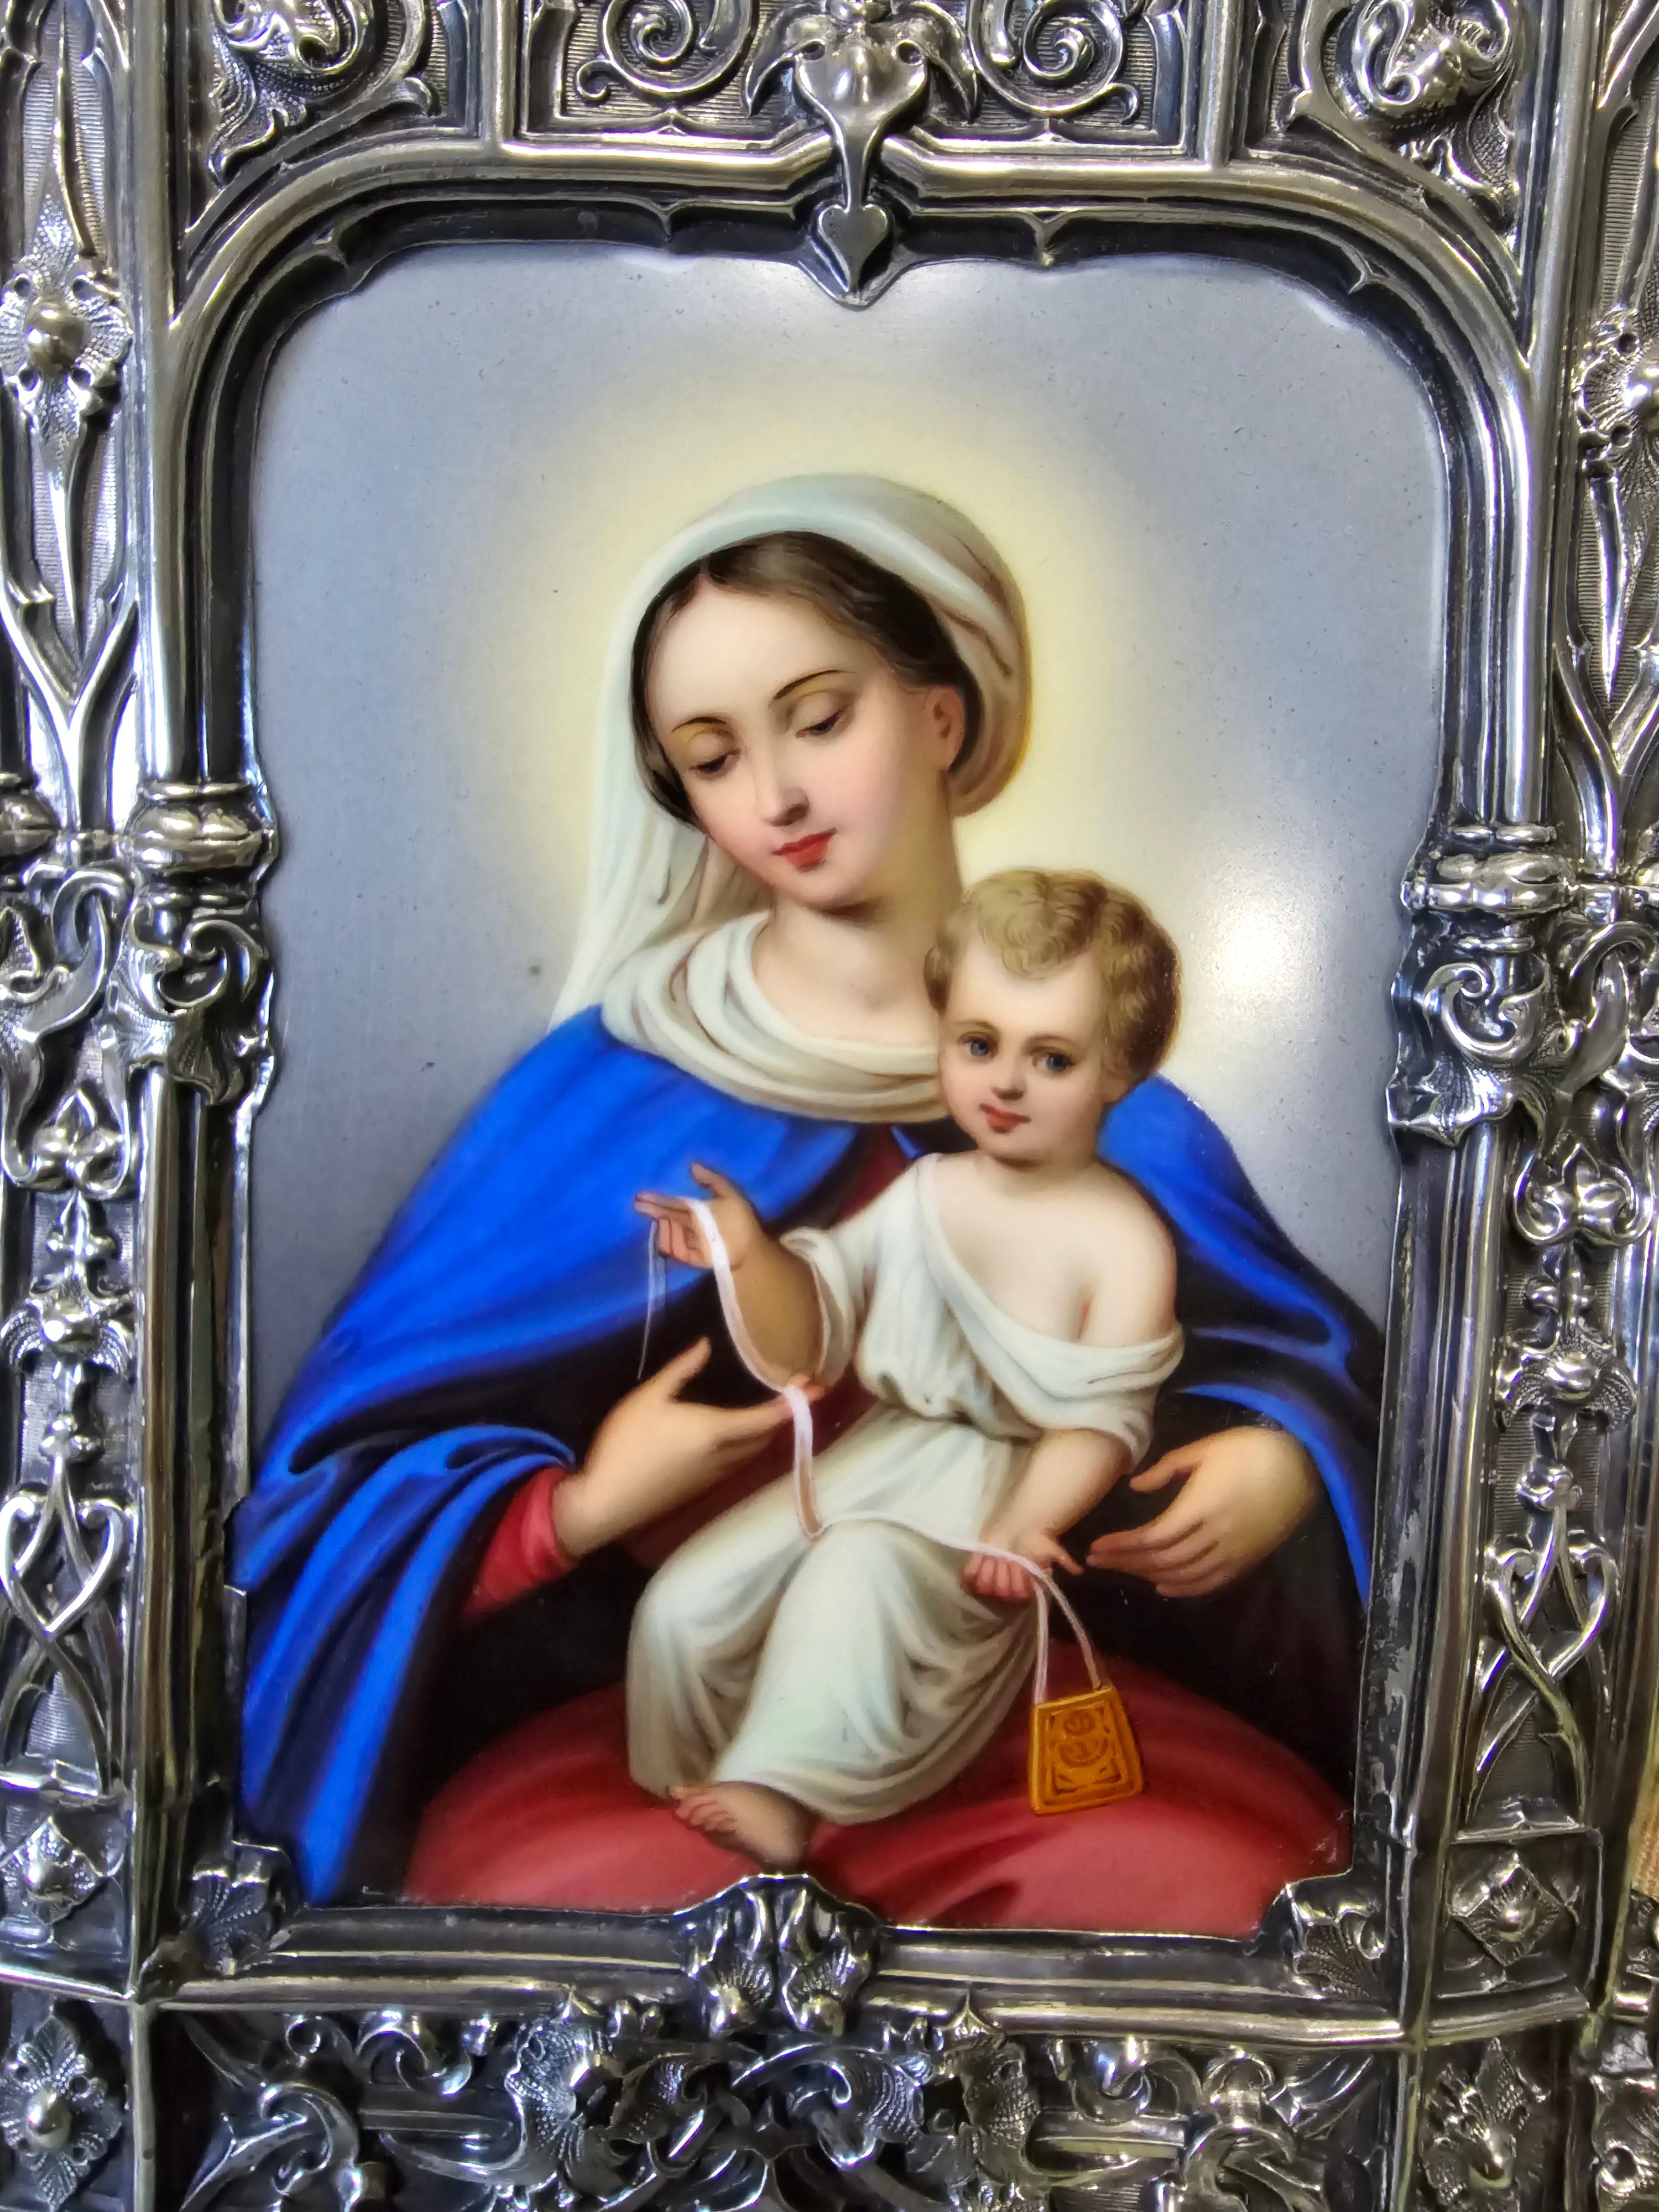 Discover this splendid devotional plaque representing the Virgin Mary and the Child Jesus, made with remarkable enameling work and framed in a silver frame. This piece of great artistic finesse transports us to the heart of the 19th century in